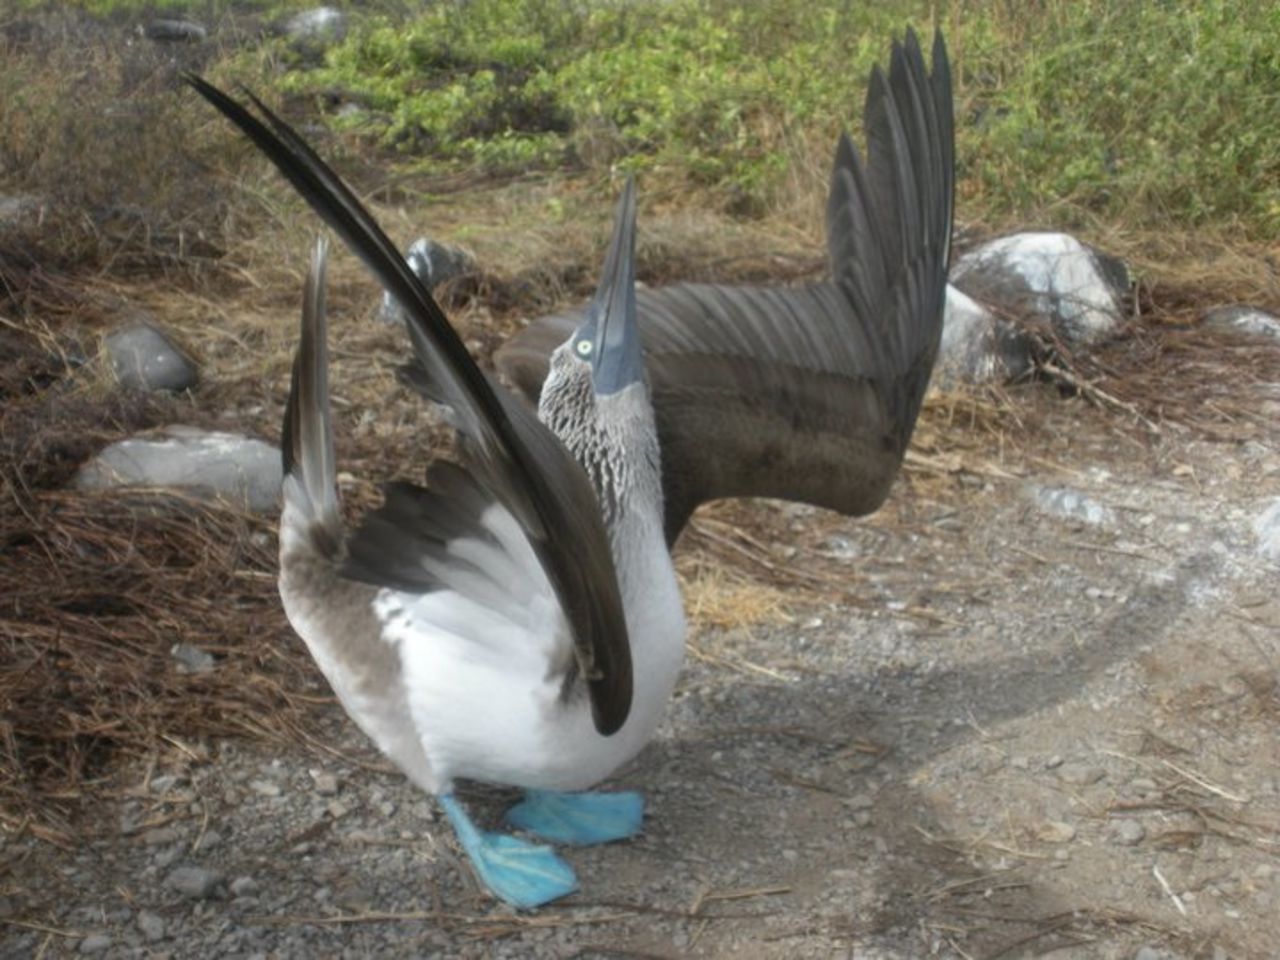 Anne Sullivan, 23, of Indianapolis sent this photo of a blue-footed booby. She says she had lots of great adventures and animal sightings in the Galapagos Islands. "It exceeded my expectations," she said. "I couldn't believe how close we got to the animals. They weren't scared of us. I even saw several of the finches that Darwin talked about. It was interesting to try and catch a glimpse of the birds and their different beak shapes."